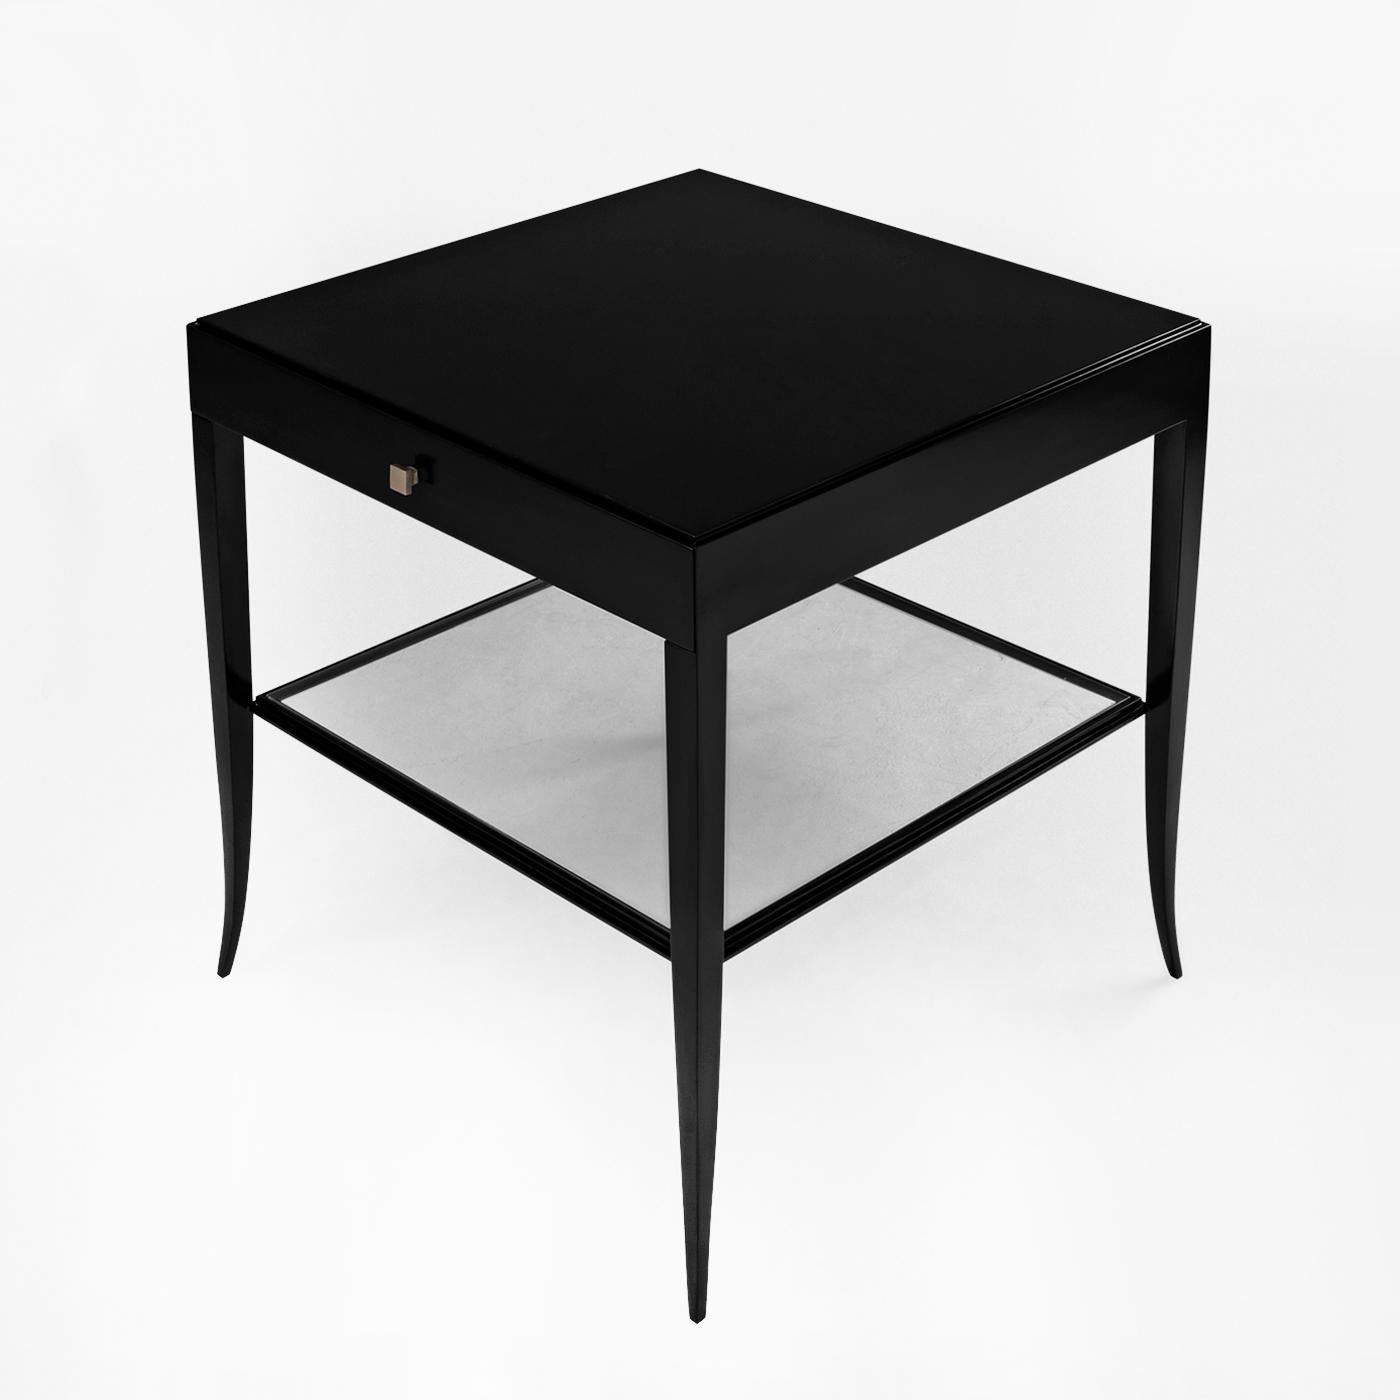 Nightstand or side table sober with handcrafted
solid mahogany wood structure in black satinated
finish. With 1 drawer and with 1 tempered clear glass
top at the bottom with forged iron frame.
Also available in ivory lacquered, white